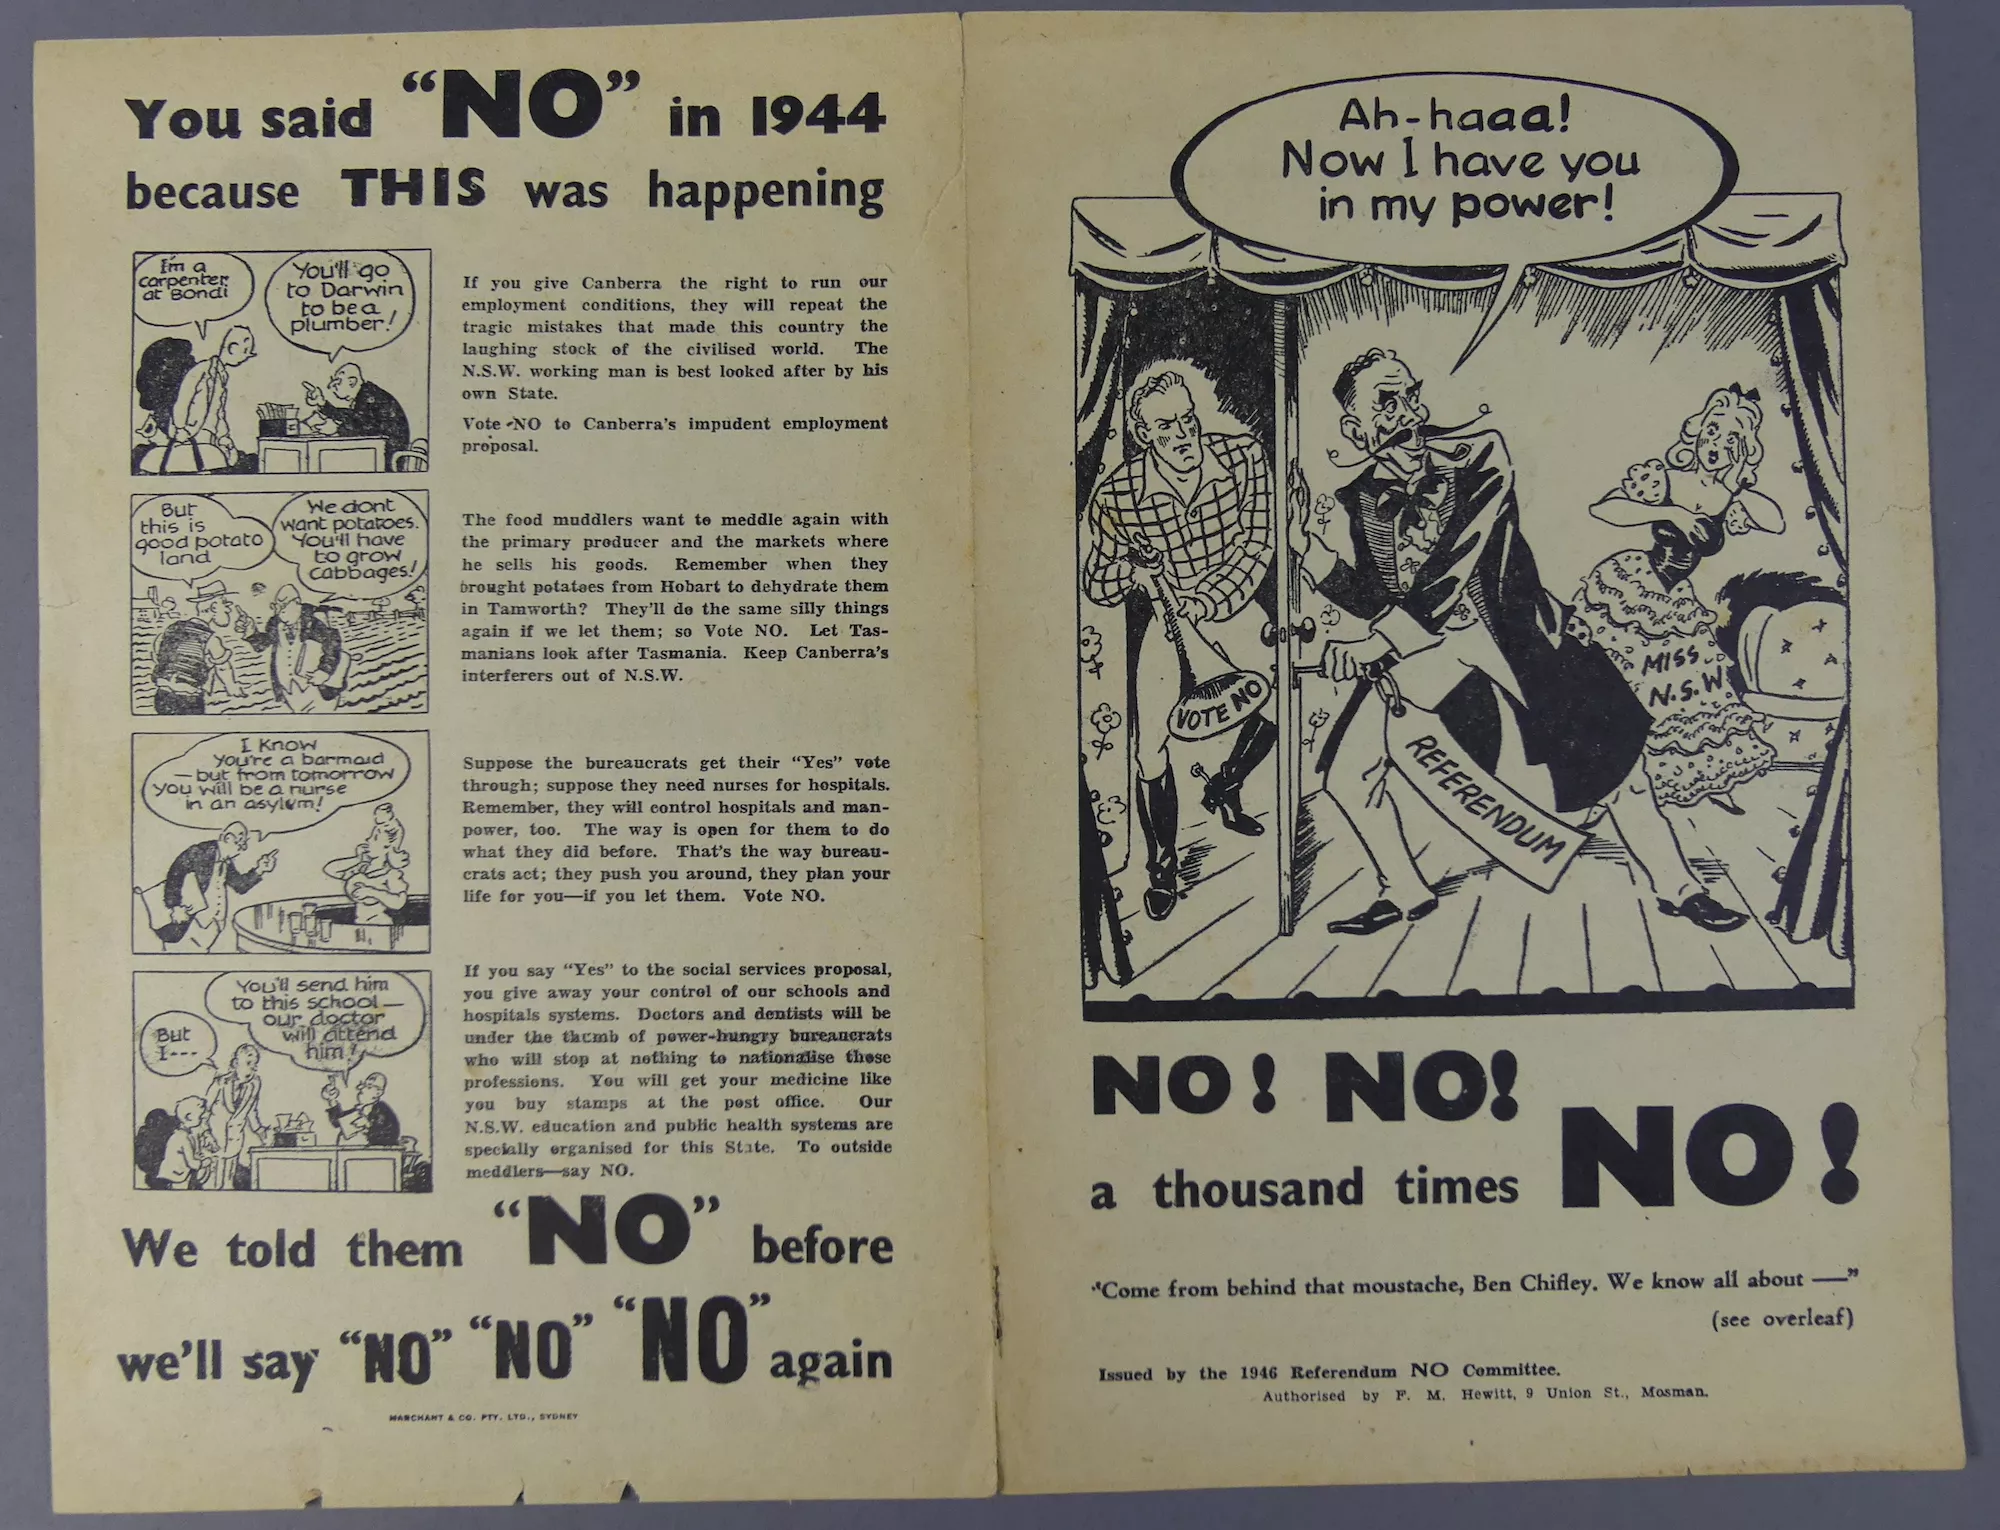 In the 1946  ‘no’ campaign pamphlet, which focused heavily on the rights of the states, Chifley was portrayed as a power-hungry villain and a spider  